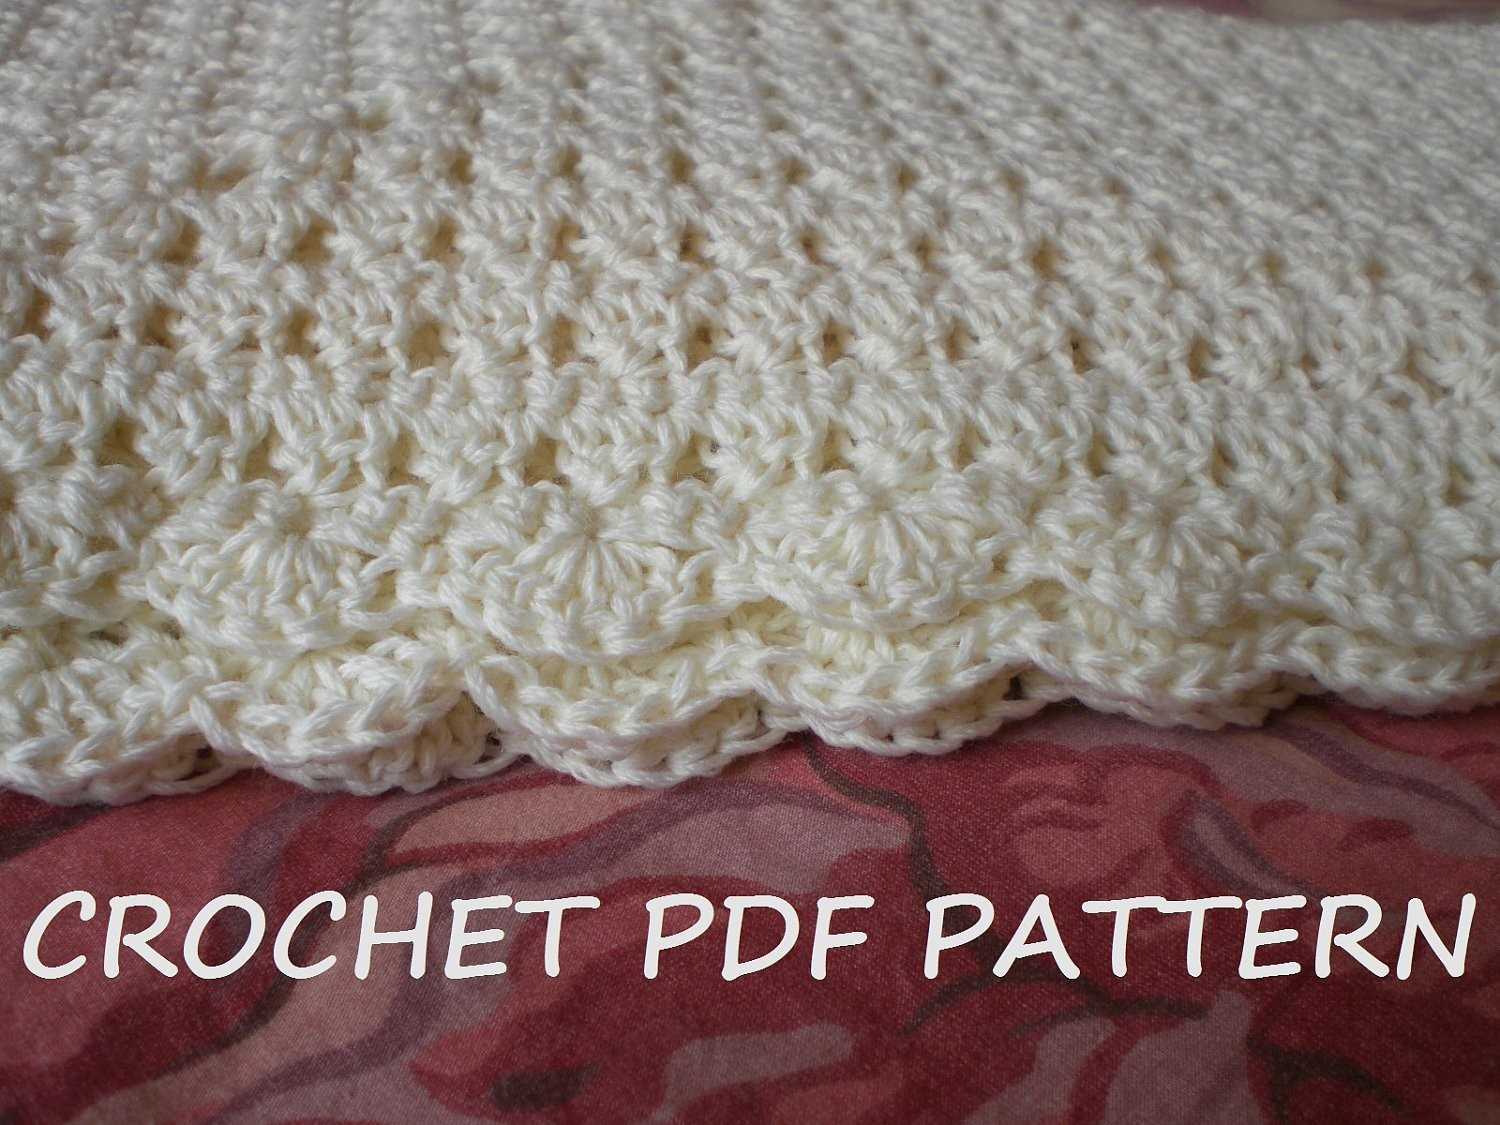 Crochet Patterns Baby Blankets Patterns For Crocheting Ba Blankets 15 Adorable Crochet Blanket